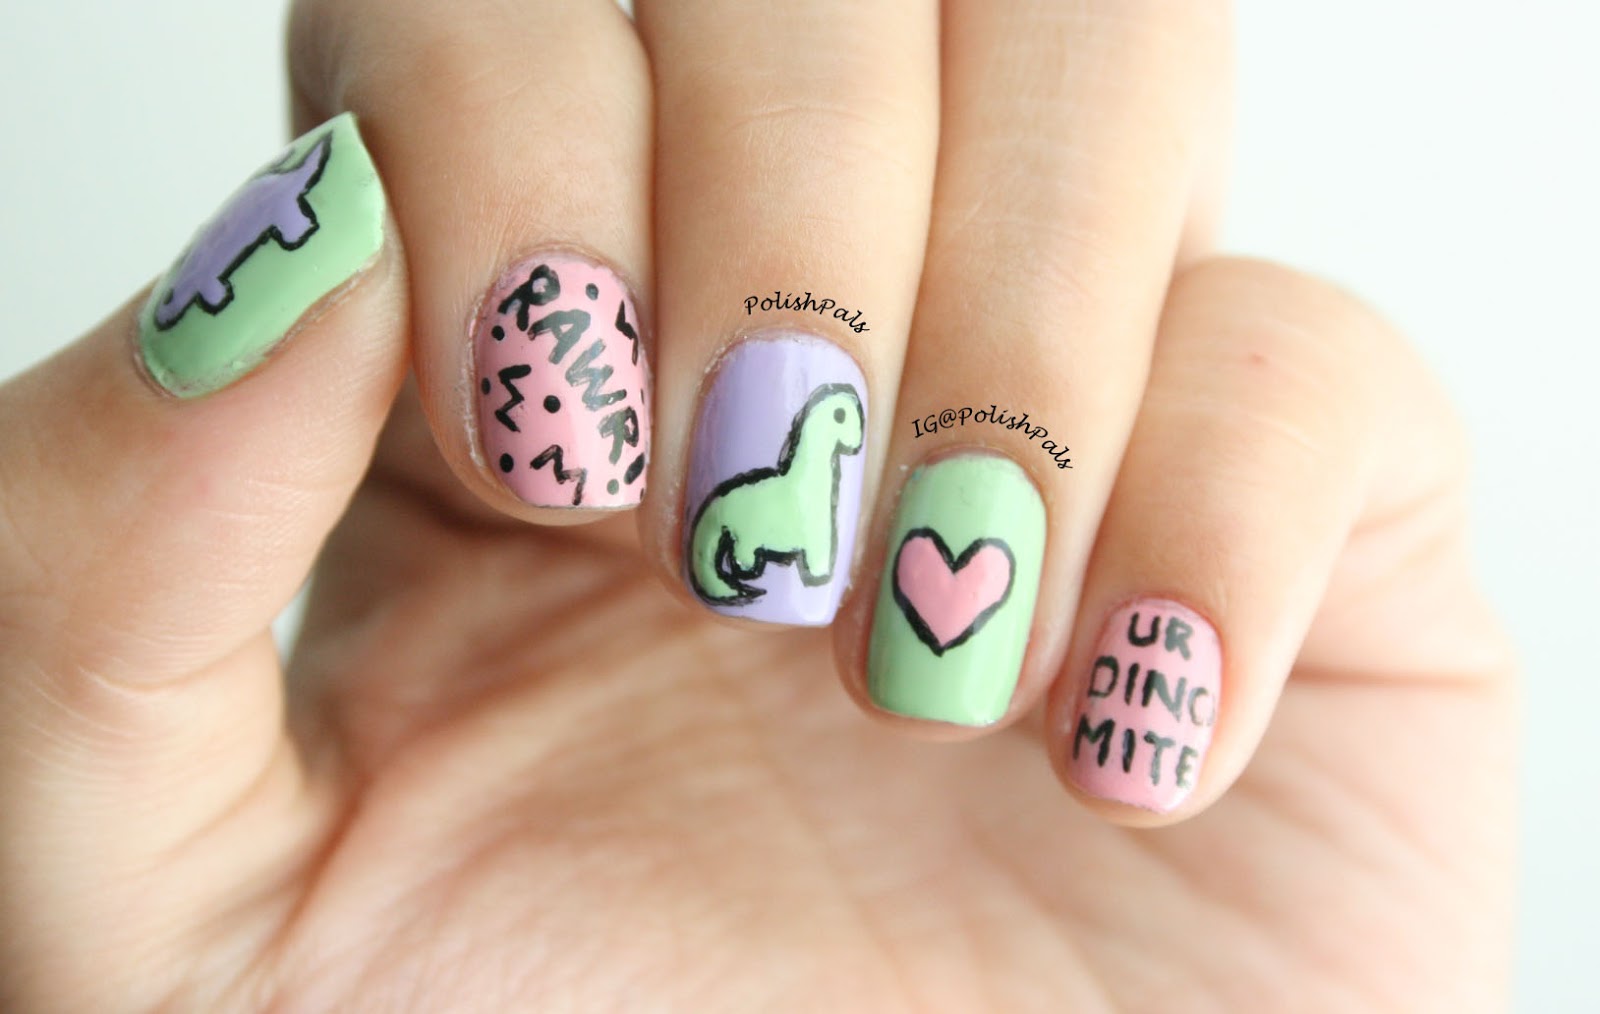 4. Dinosaur Nail Art Stickers for Boys - wide 3